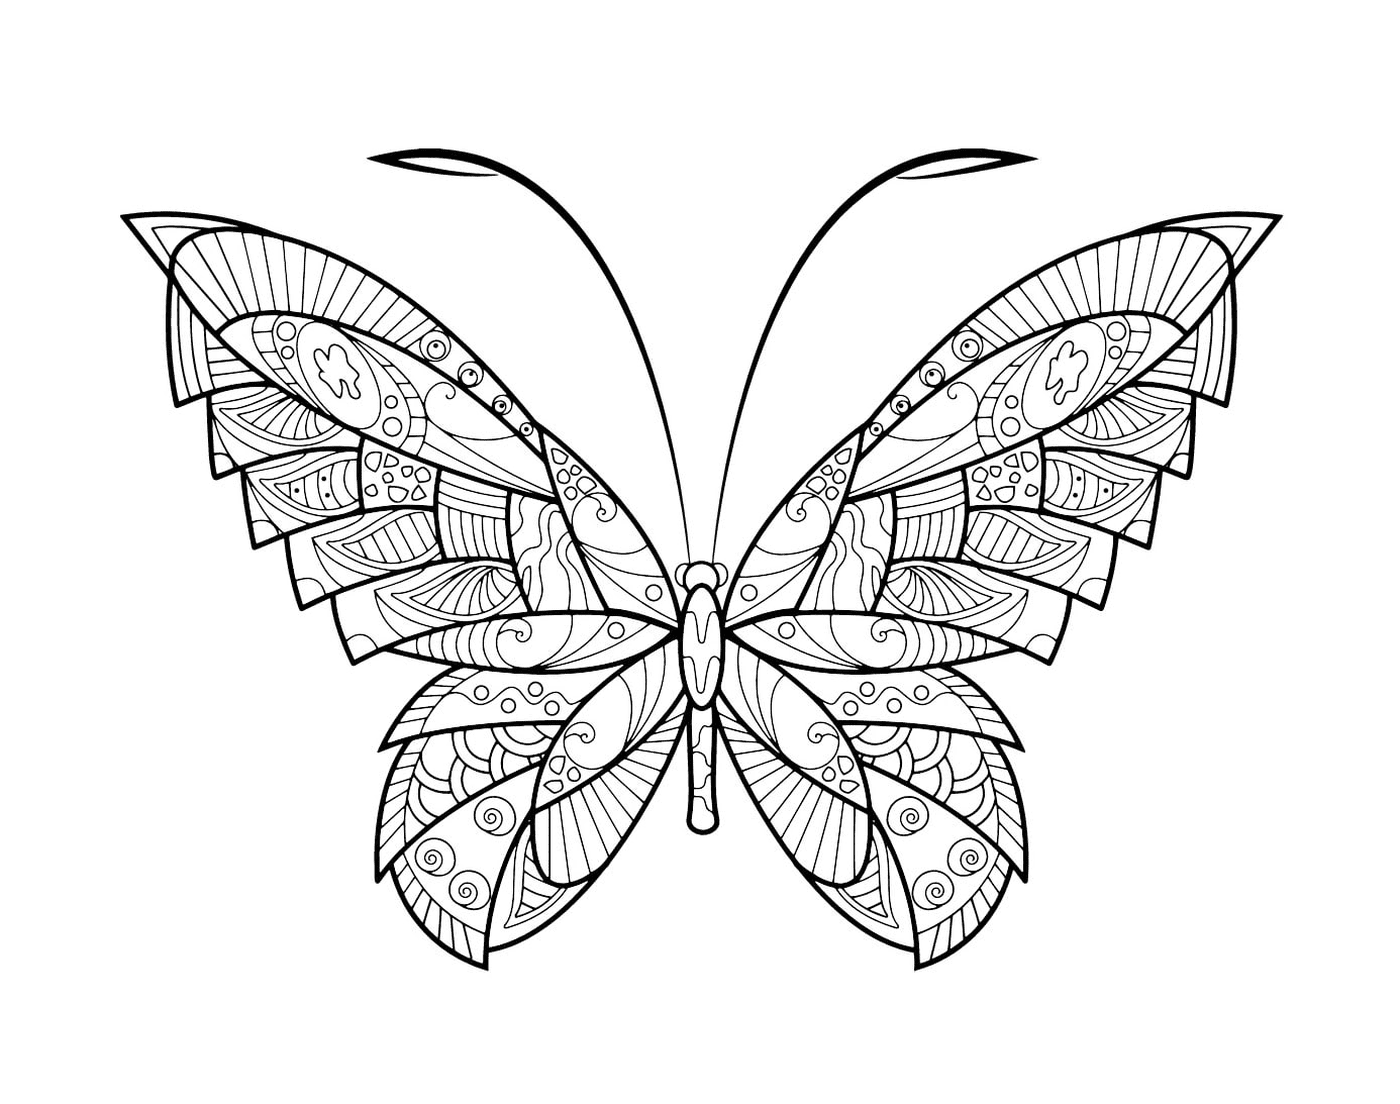  Zentangle Butterfly with complex patterns 